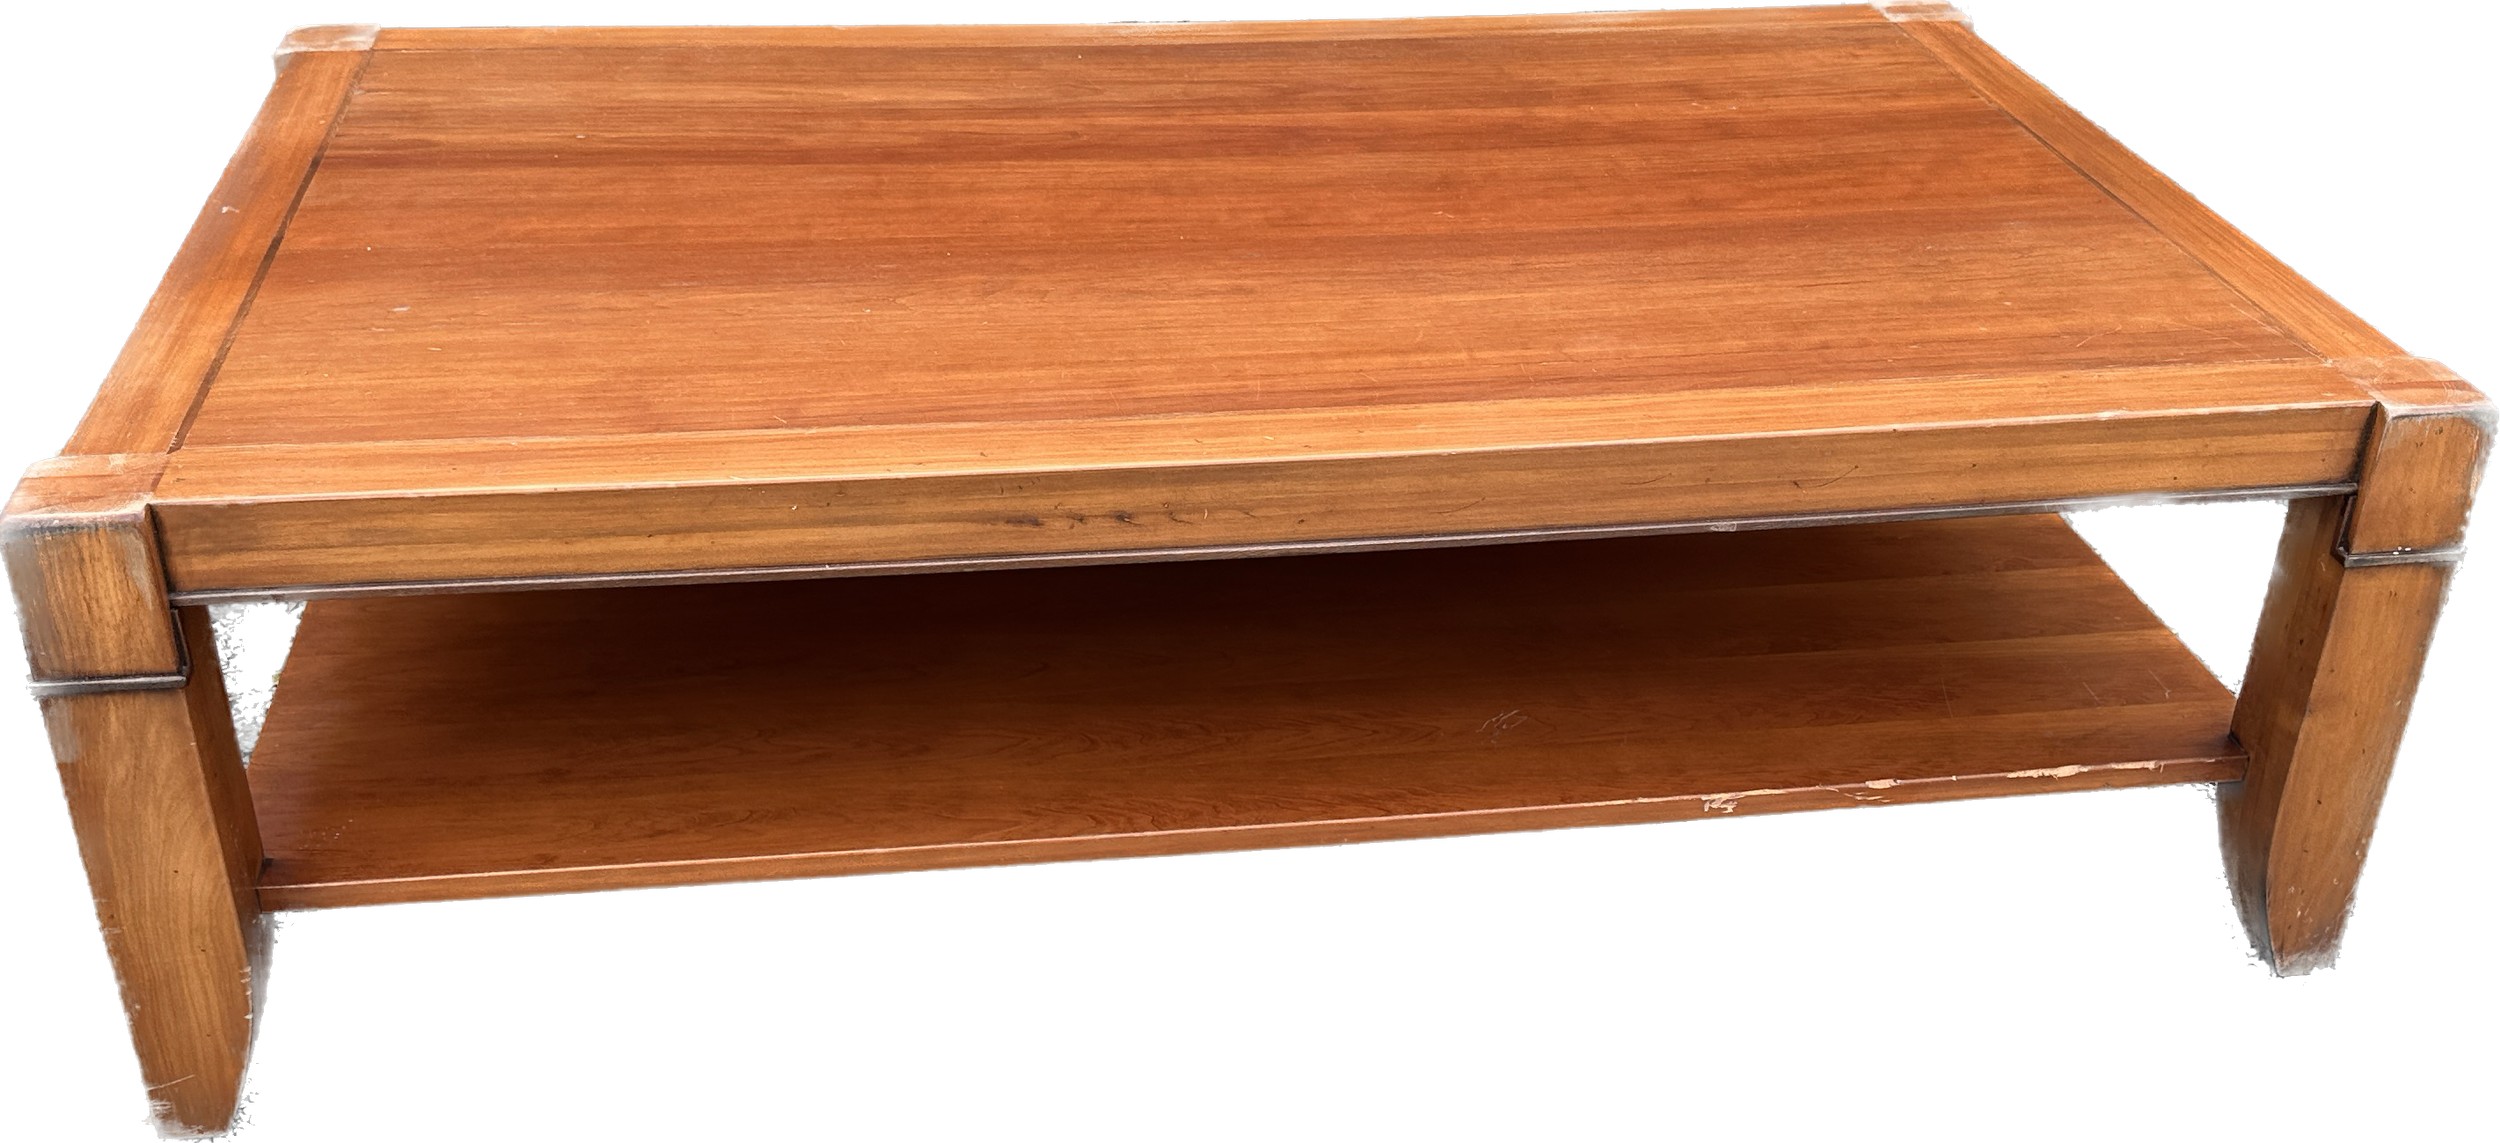 Large 1 shelf cherry wood coffee table measures approx 19 inches tall by 63 inches wide and 39.5 - Image 3 of 3